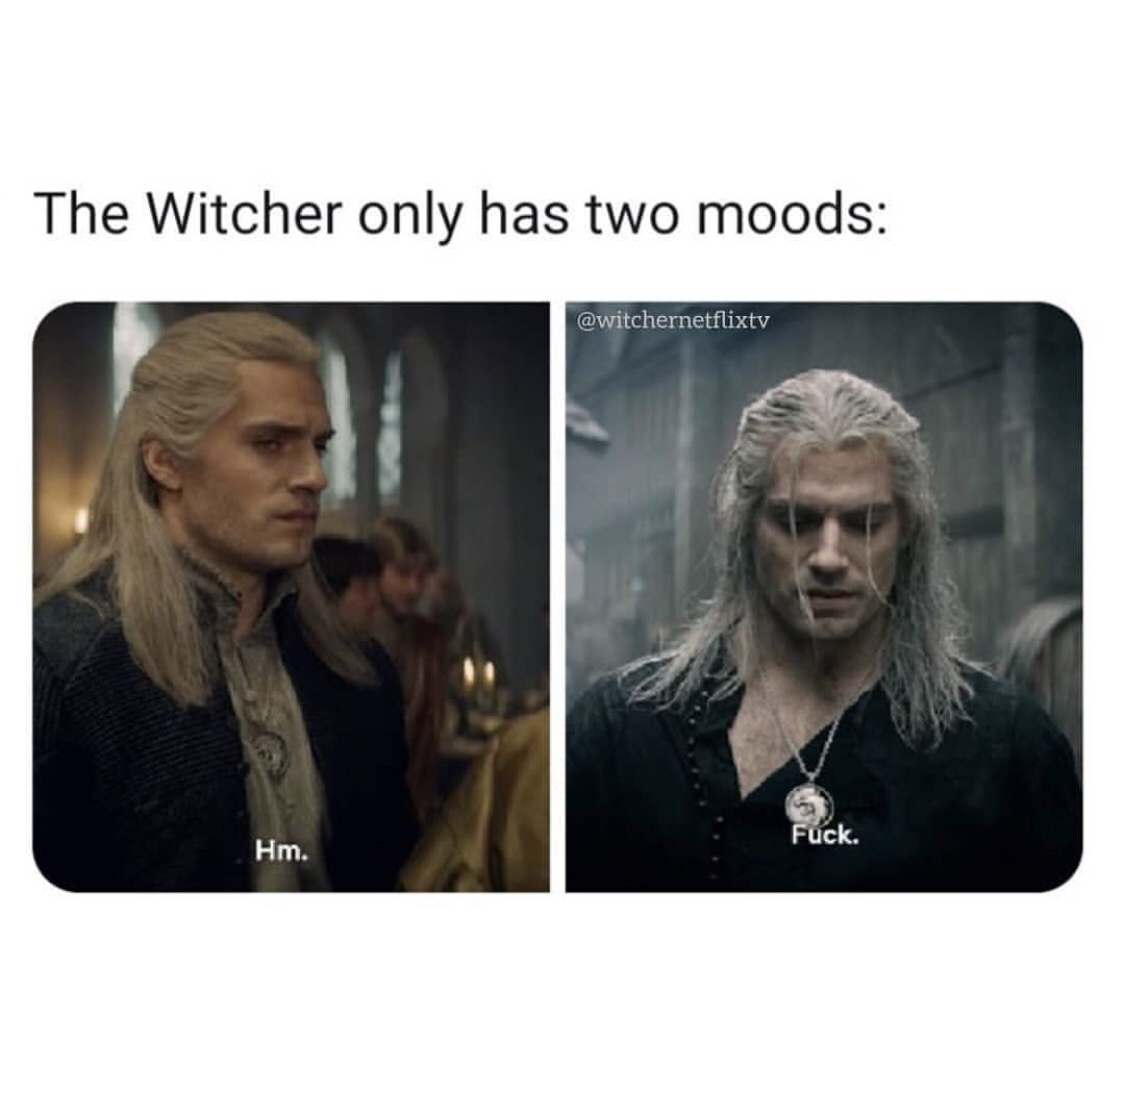 witcher netflix fuck - The Witcher only has two moods Fuck. Hm.